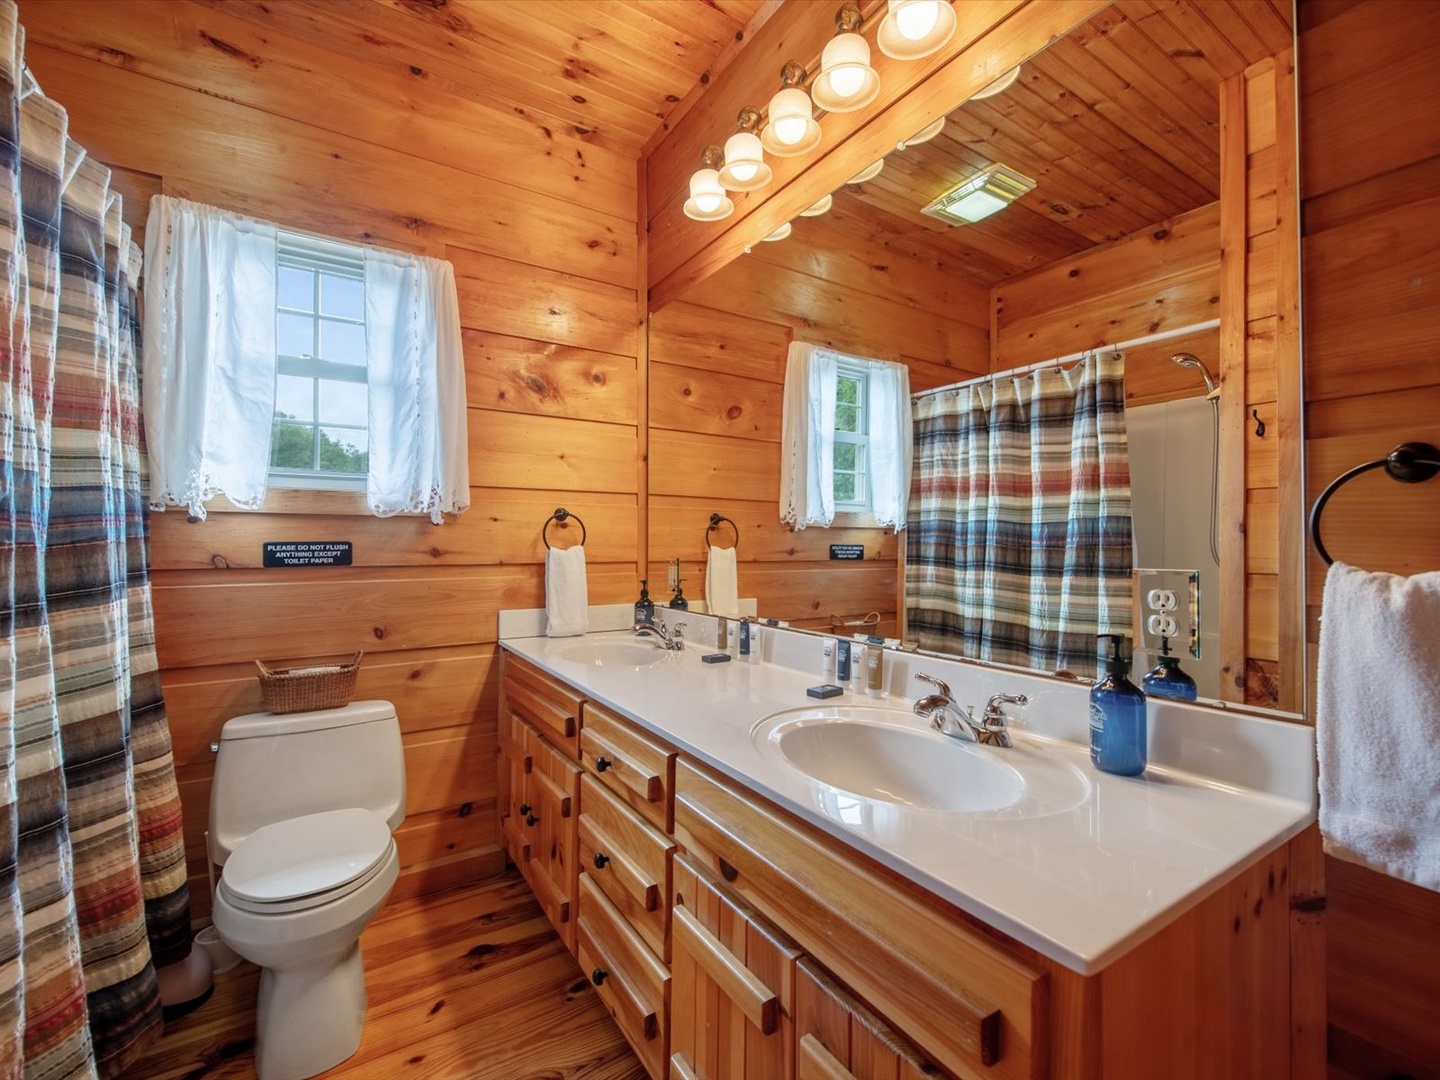 Take Me to the River - Entry Level Primary Bathroom